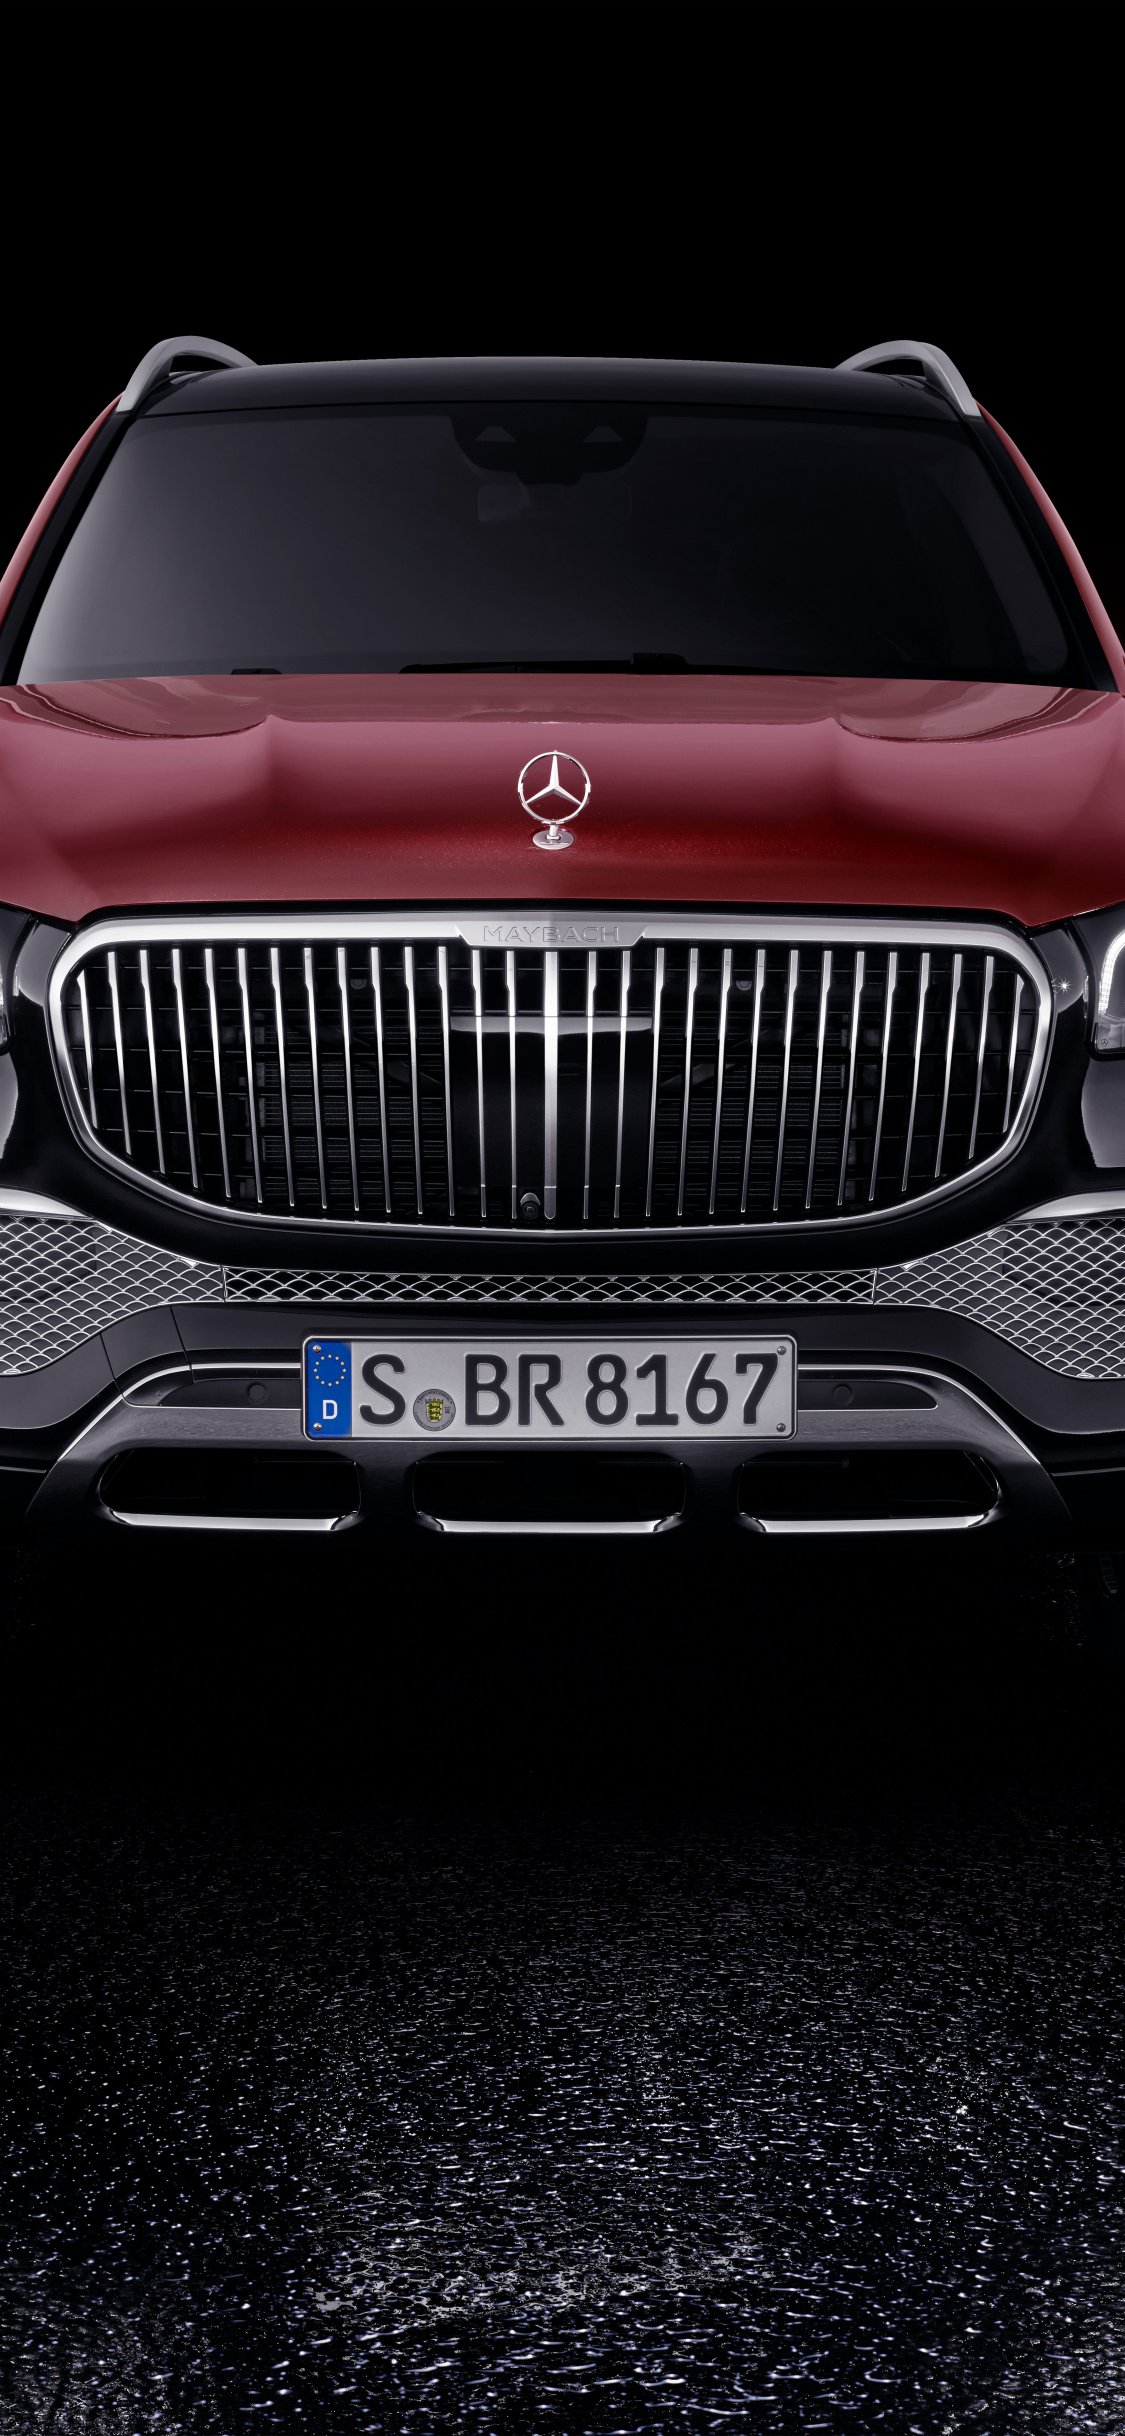 Luxury Car, SUV, Front View, Mercedes Maybach GLS 600 Wallpaper, 10314x HD Image, Picture, 837493be